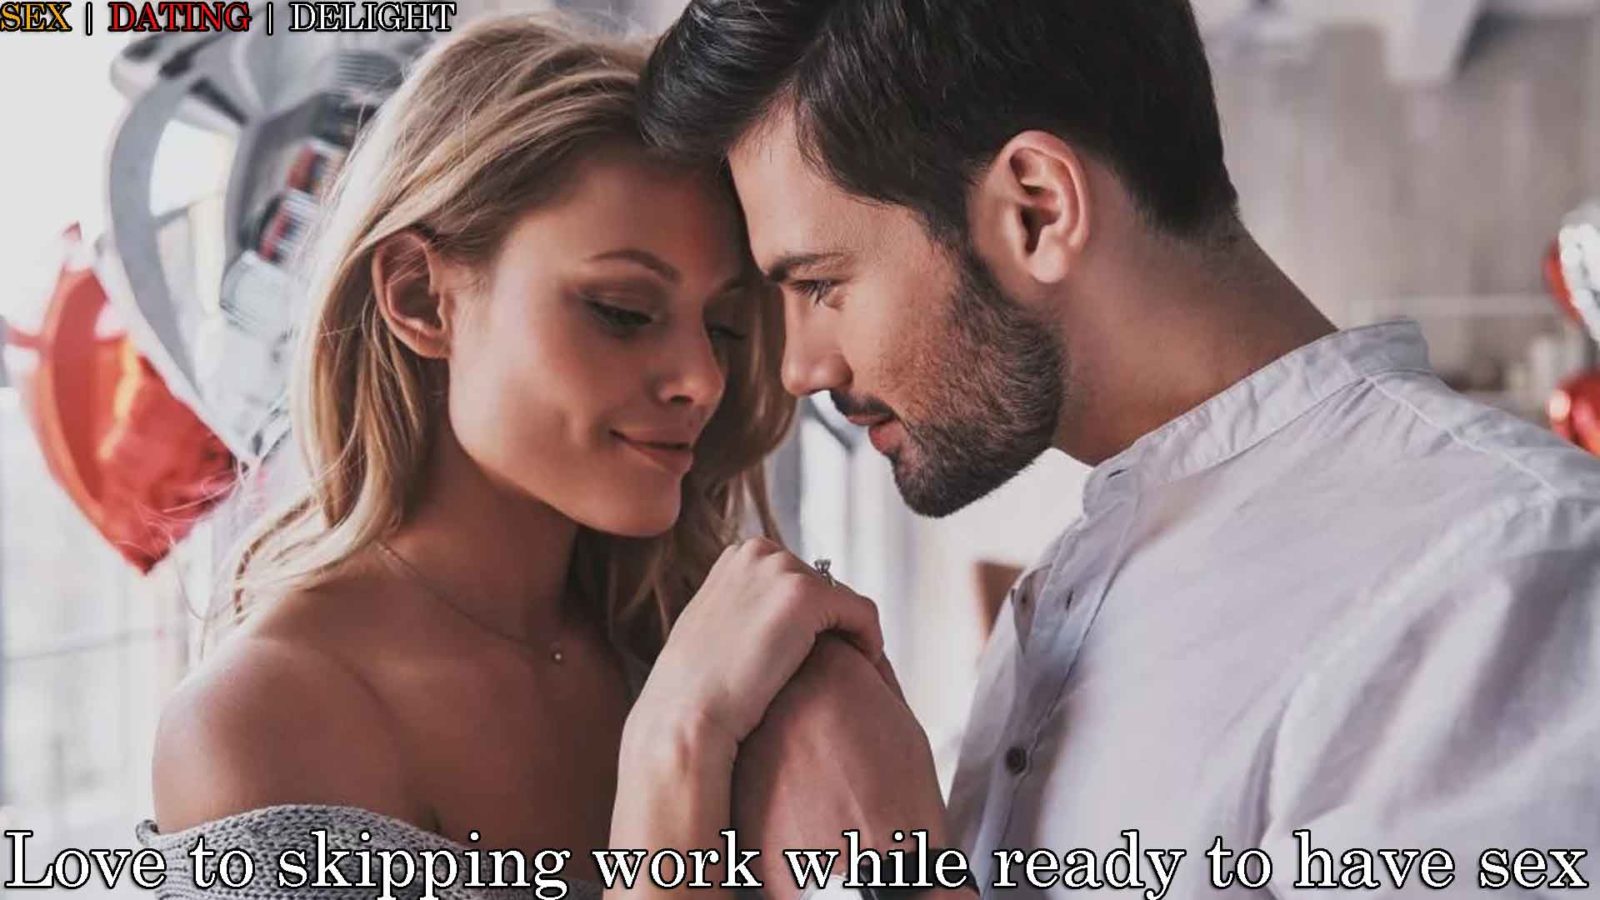 Love to skipping work while ready to have sex